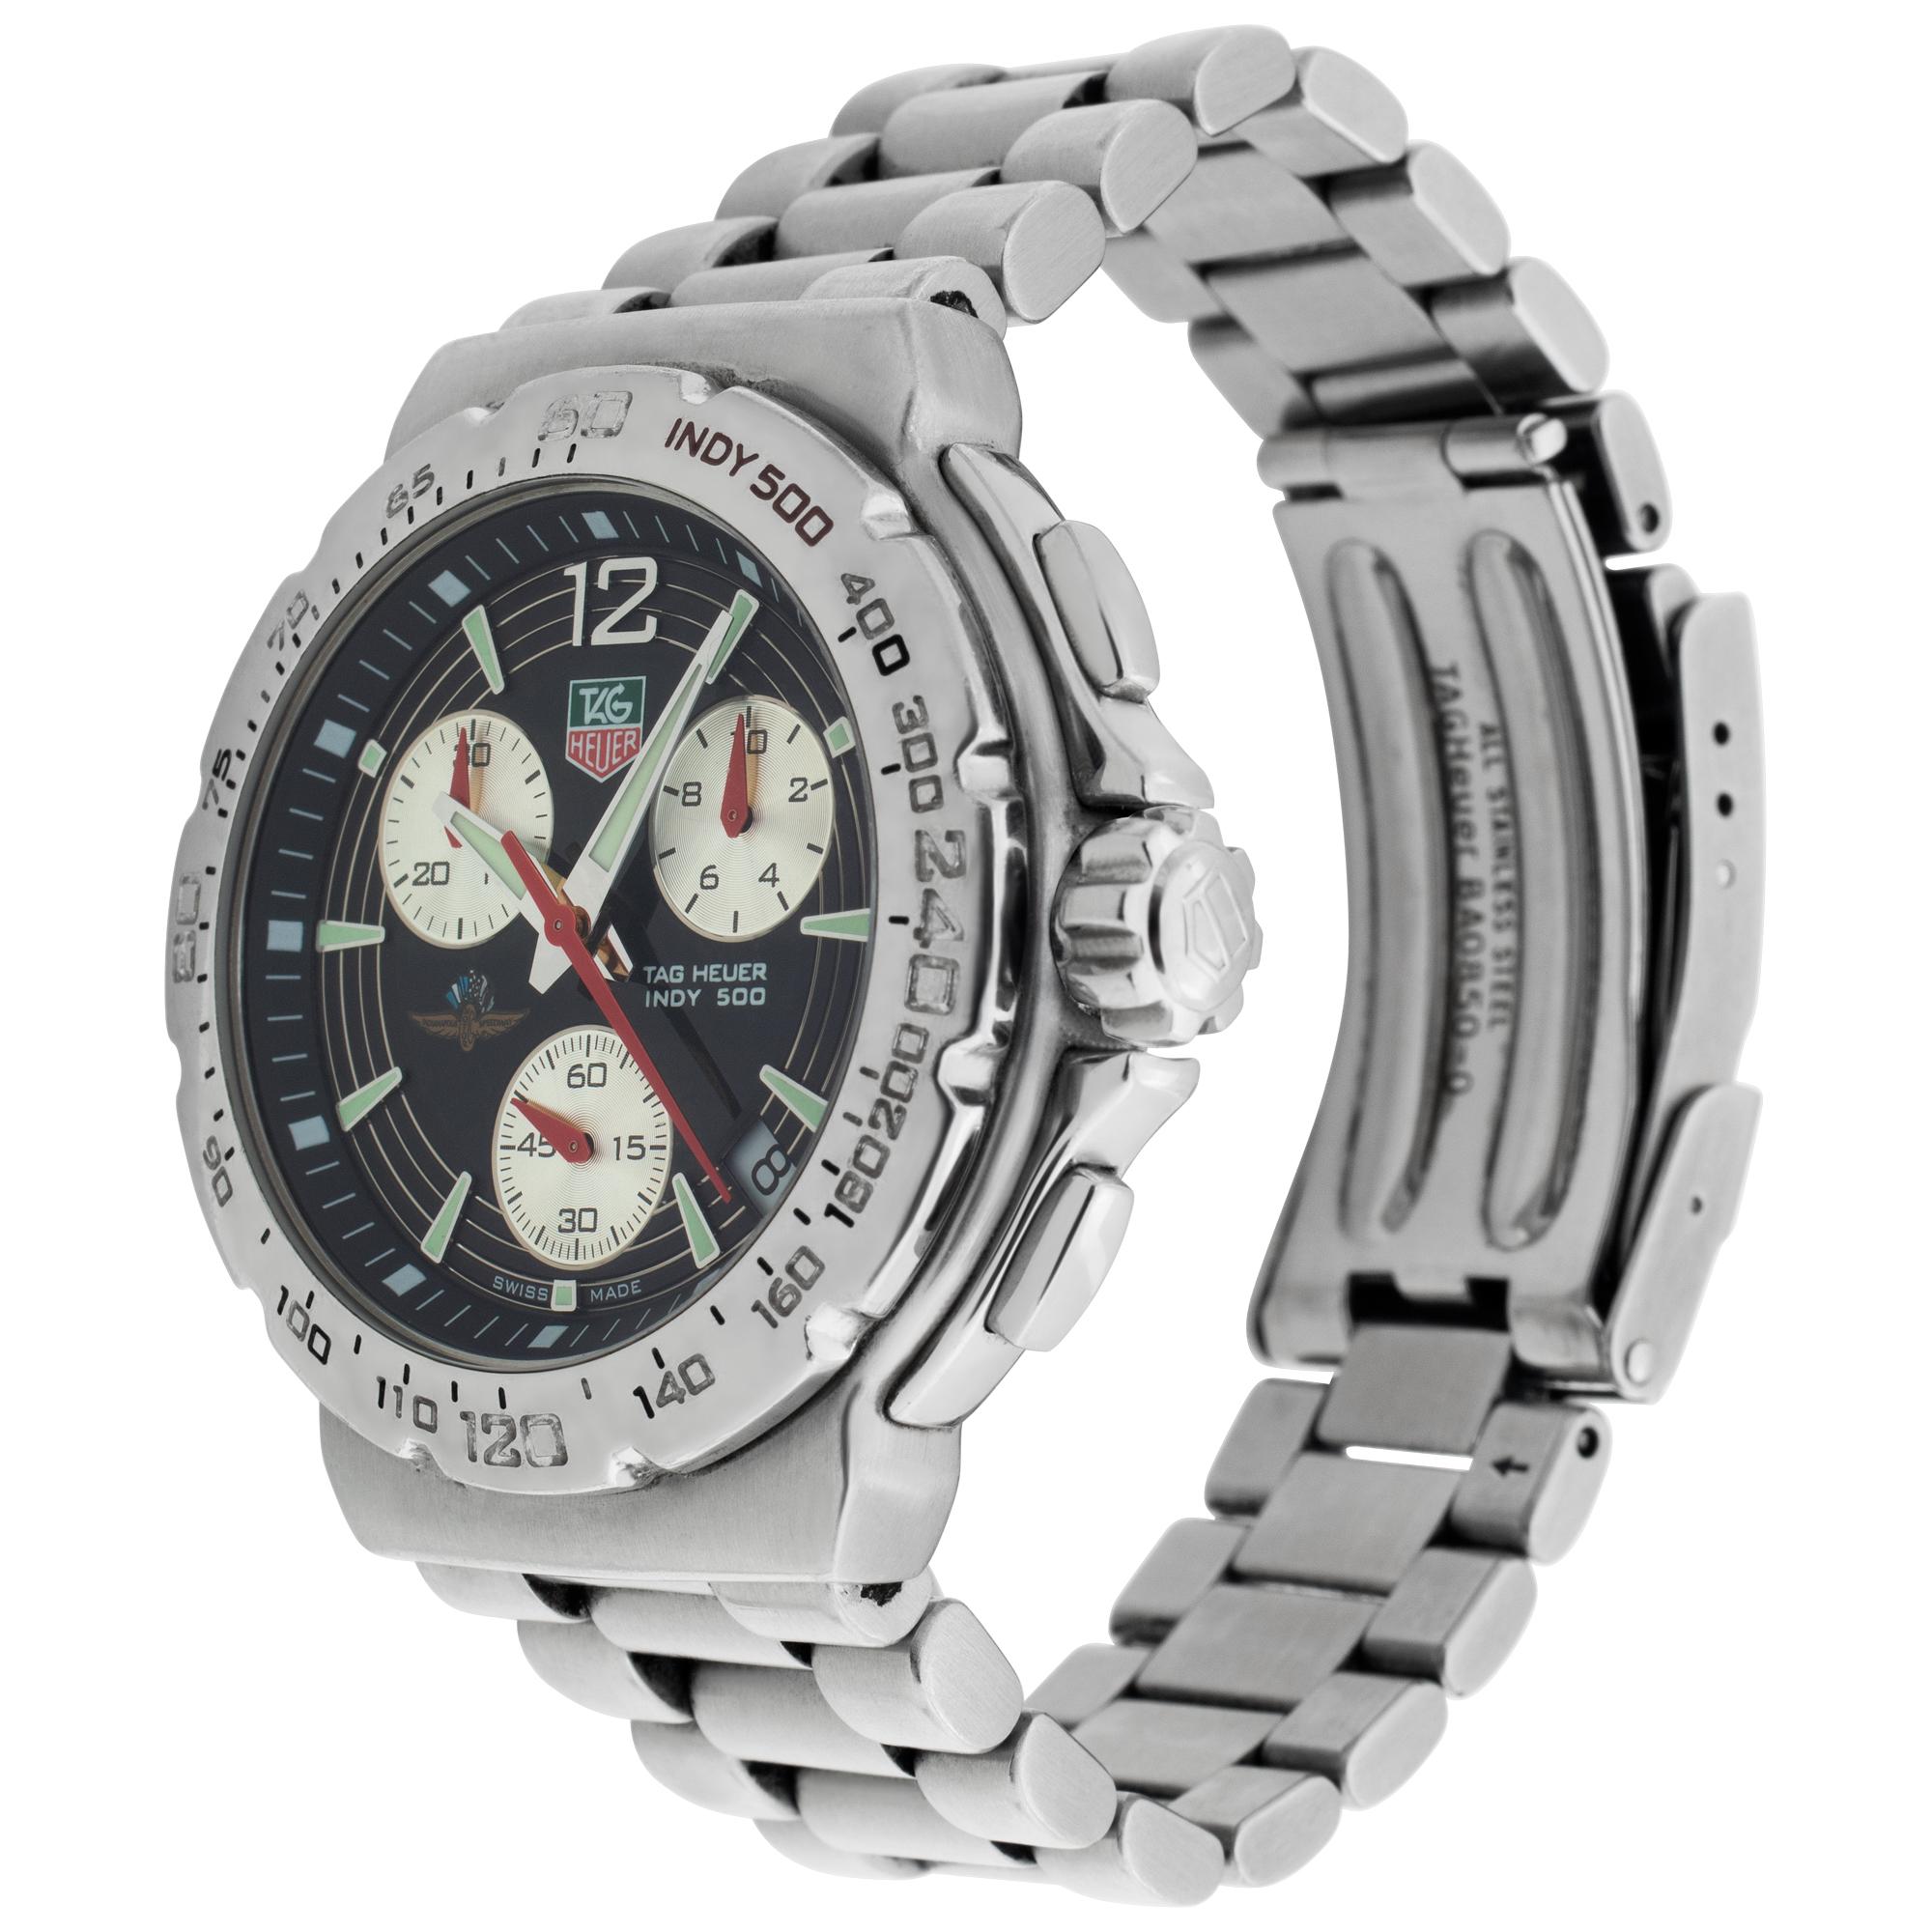 Tag Heuer Chronograph Indy 500 in stainless steel. Quartz, with date and sub-seconds. 38 mm case size. Ref CAC111B. Circa 1990s. Fine Pre-owned Tag Heuer Watch. Certified preowned Sport Tag Heuer CAC111B watch is made out of Stainless steel on a